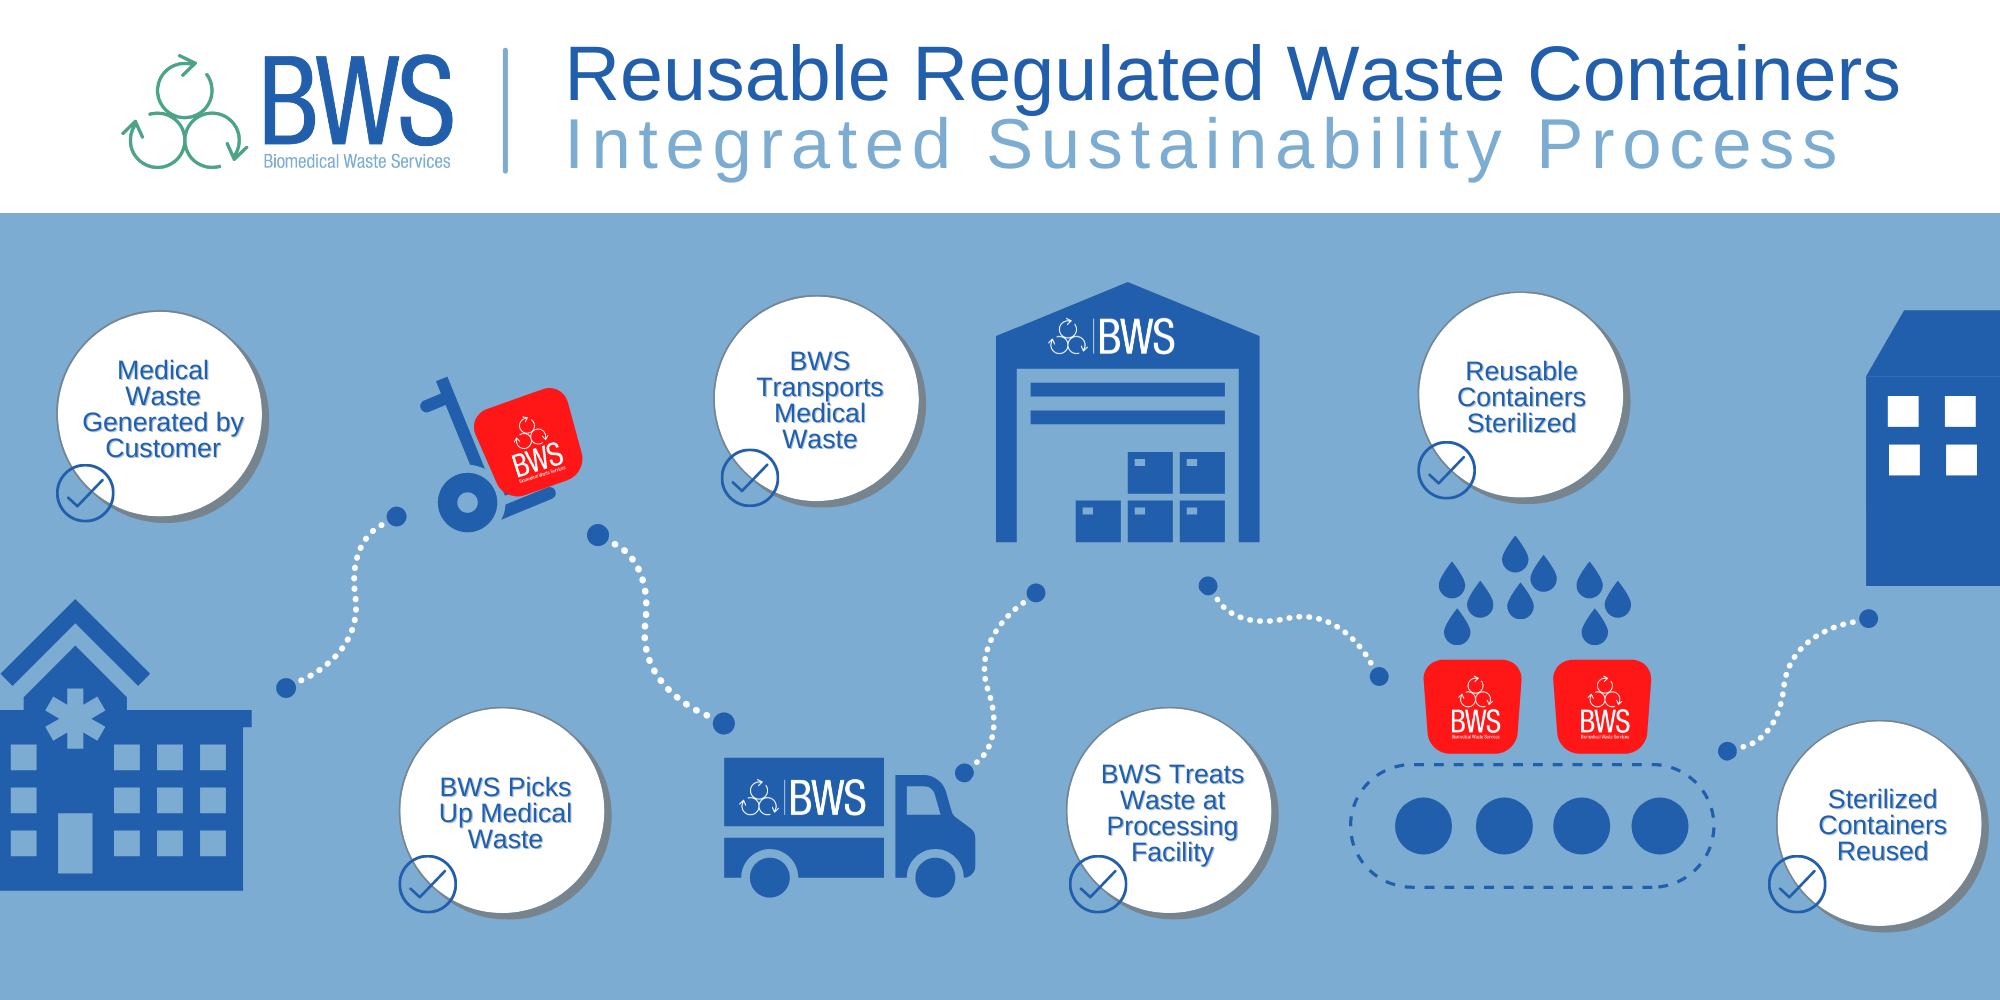 BWS Reusable Regulated Waste Container Sustainability Process Infographic